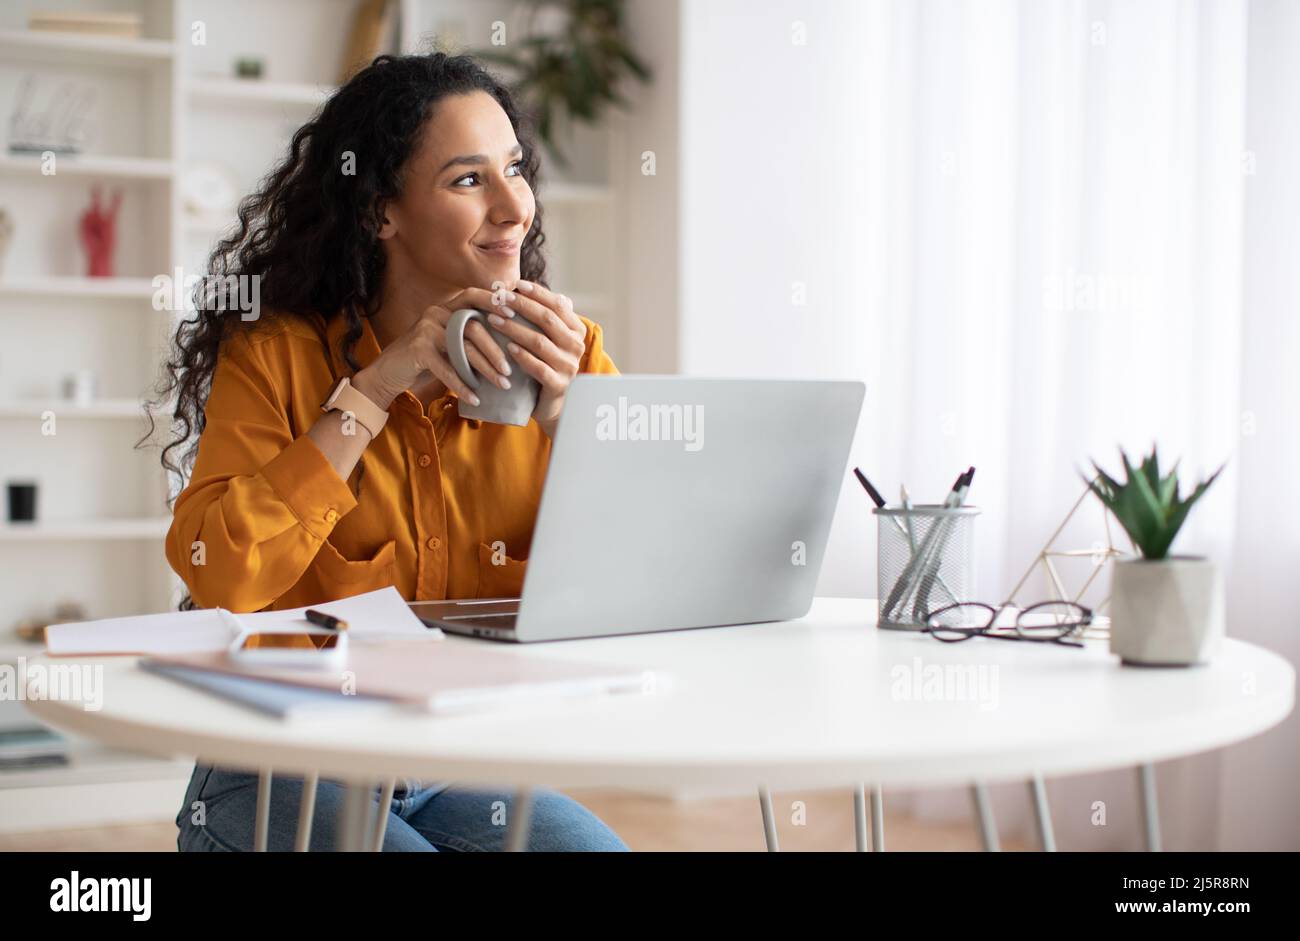 Dreamy Businesswoman Using Laptop And Holding Coffee Cup Indoors Stock Photo